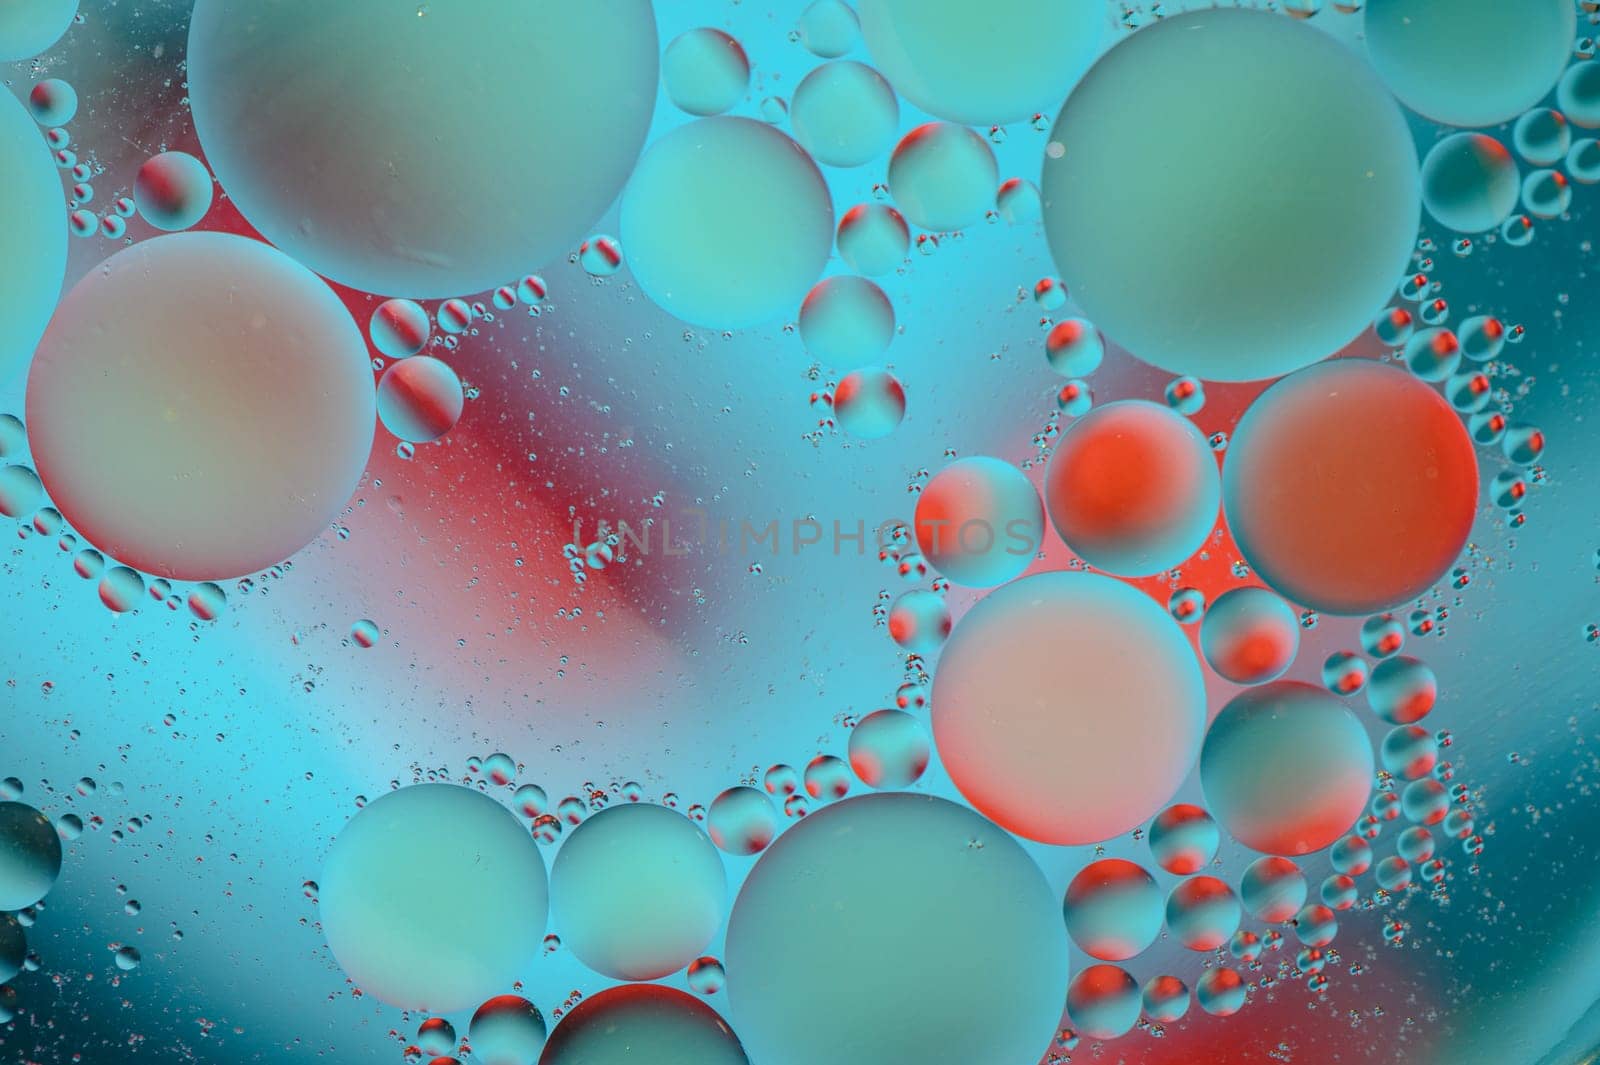 abstract background of multi-colored spots and circles microcosm universe galaxy 9 by Mixa74